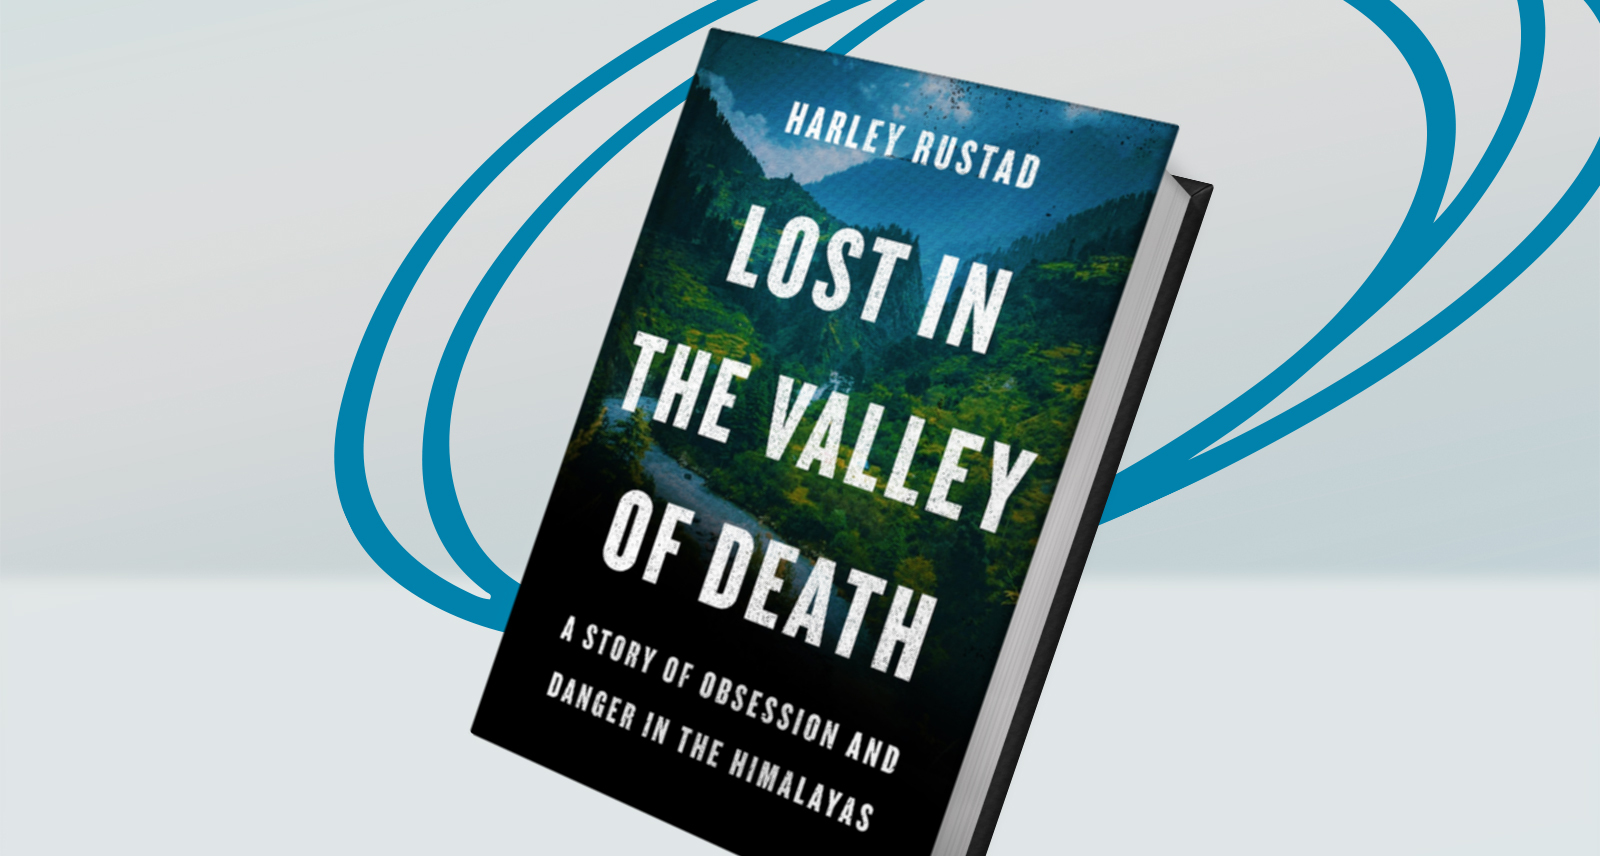 Lost In the Valley of Death Harley Rustad Interview